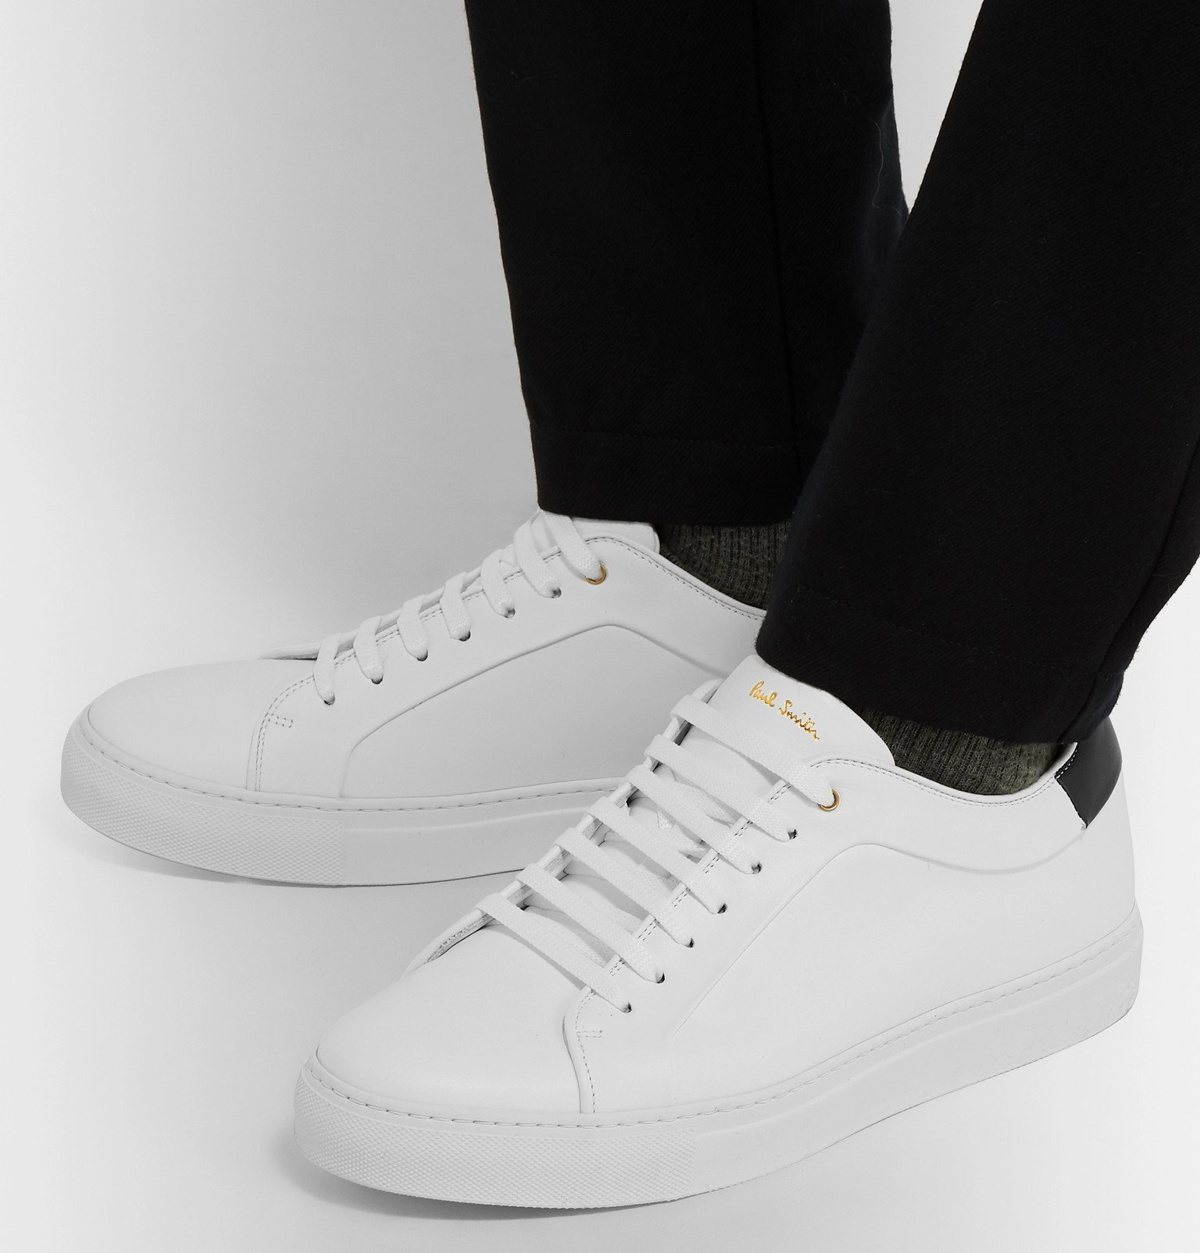 Paul Smith - Leather Sneakers - White Paul Smith